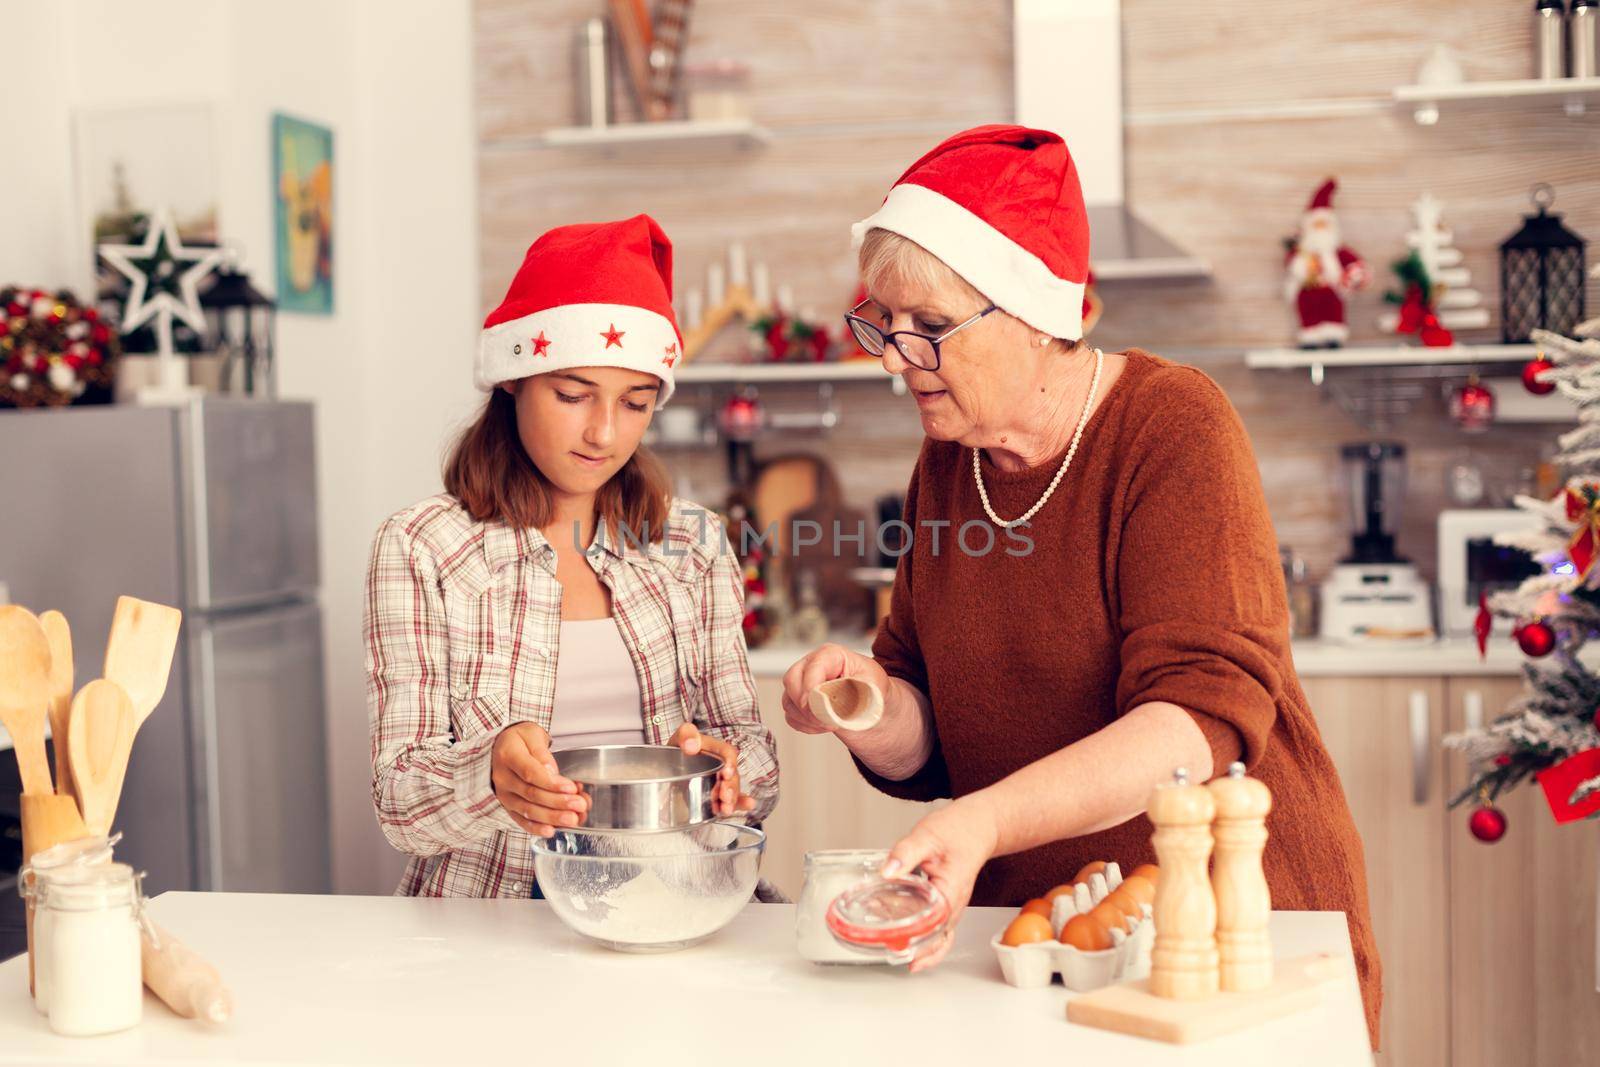 Granddaughter and mother on christmas day doing cookies with love. Happy cheerful joyfull teenage girl helping senior woman preparing sweet biscuits to celebrate winter holidays wearing santa hat.